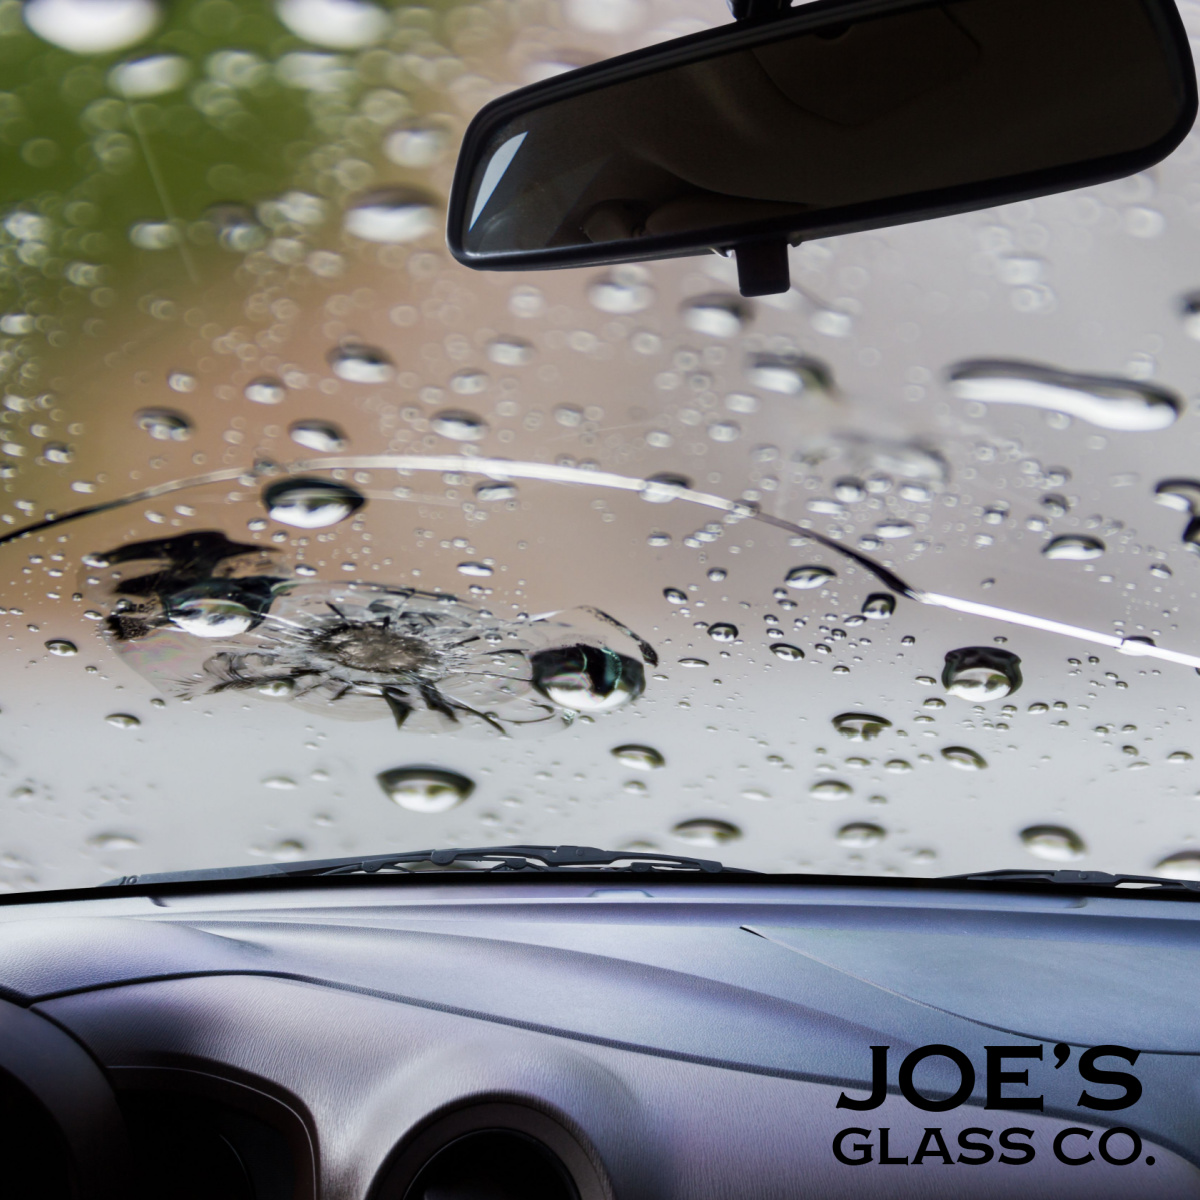 Replace Your Windshield with Repair Help from Joe’s Glass Co.